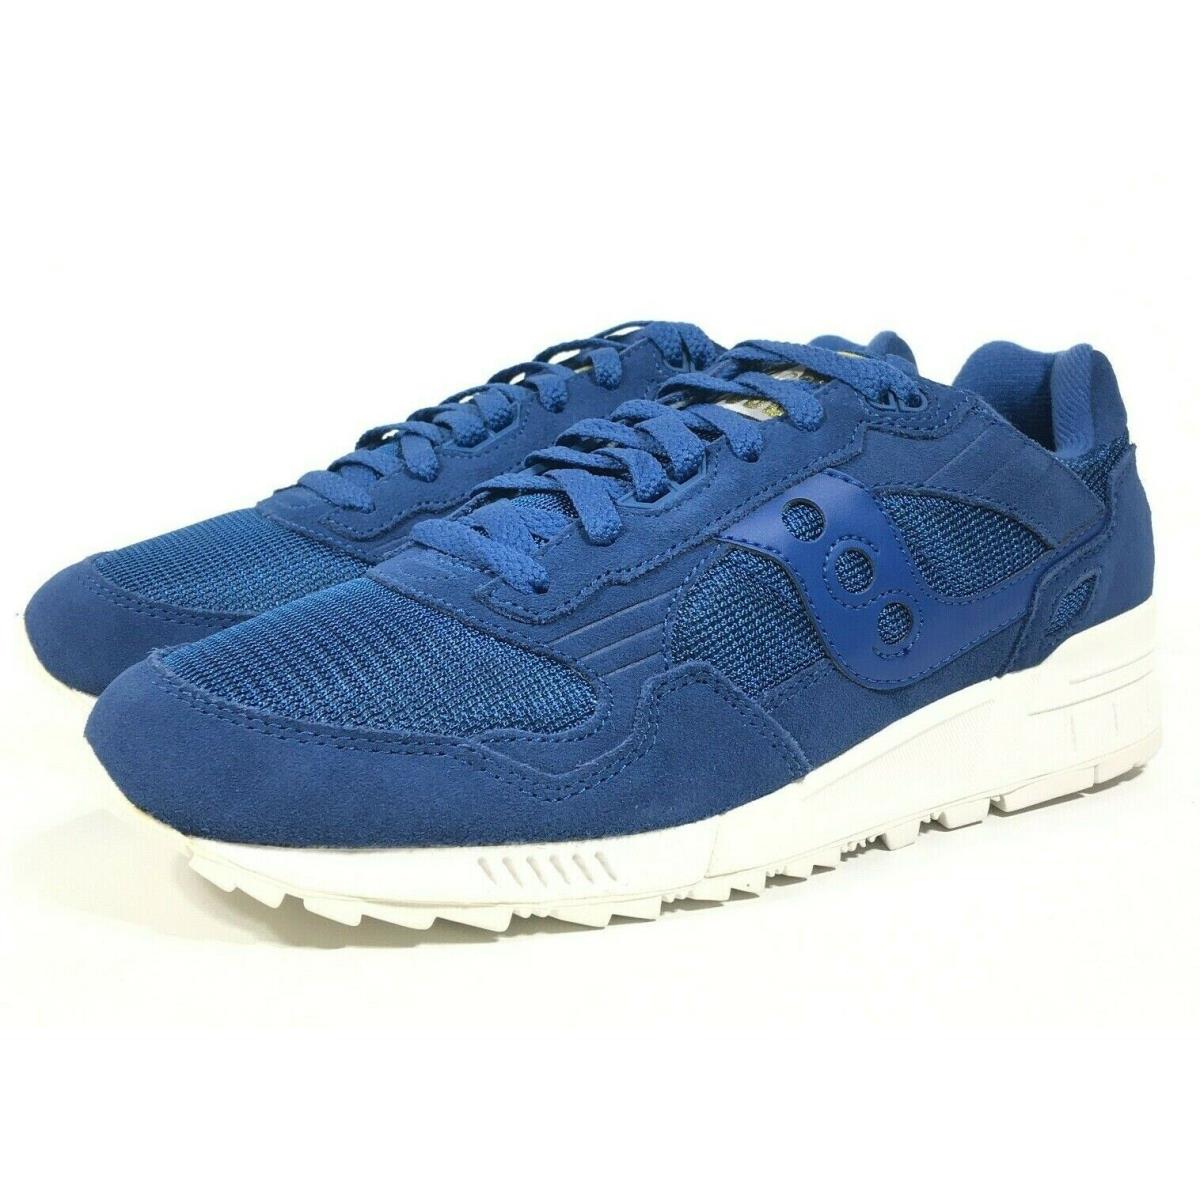 Saucony Mens Shadow 5000 Running Shoe Size 10 Blue S70404-32